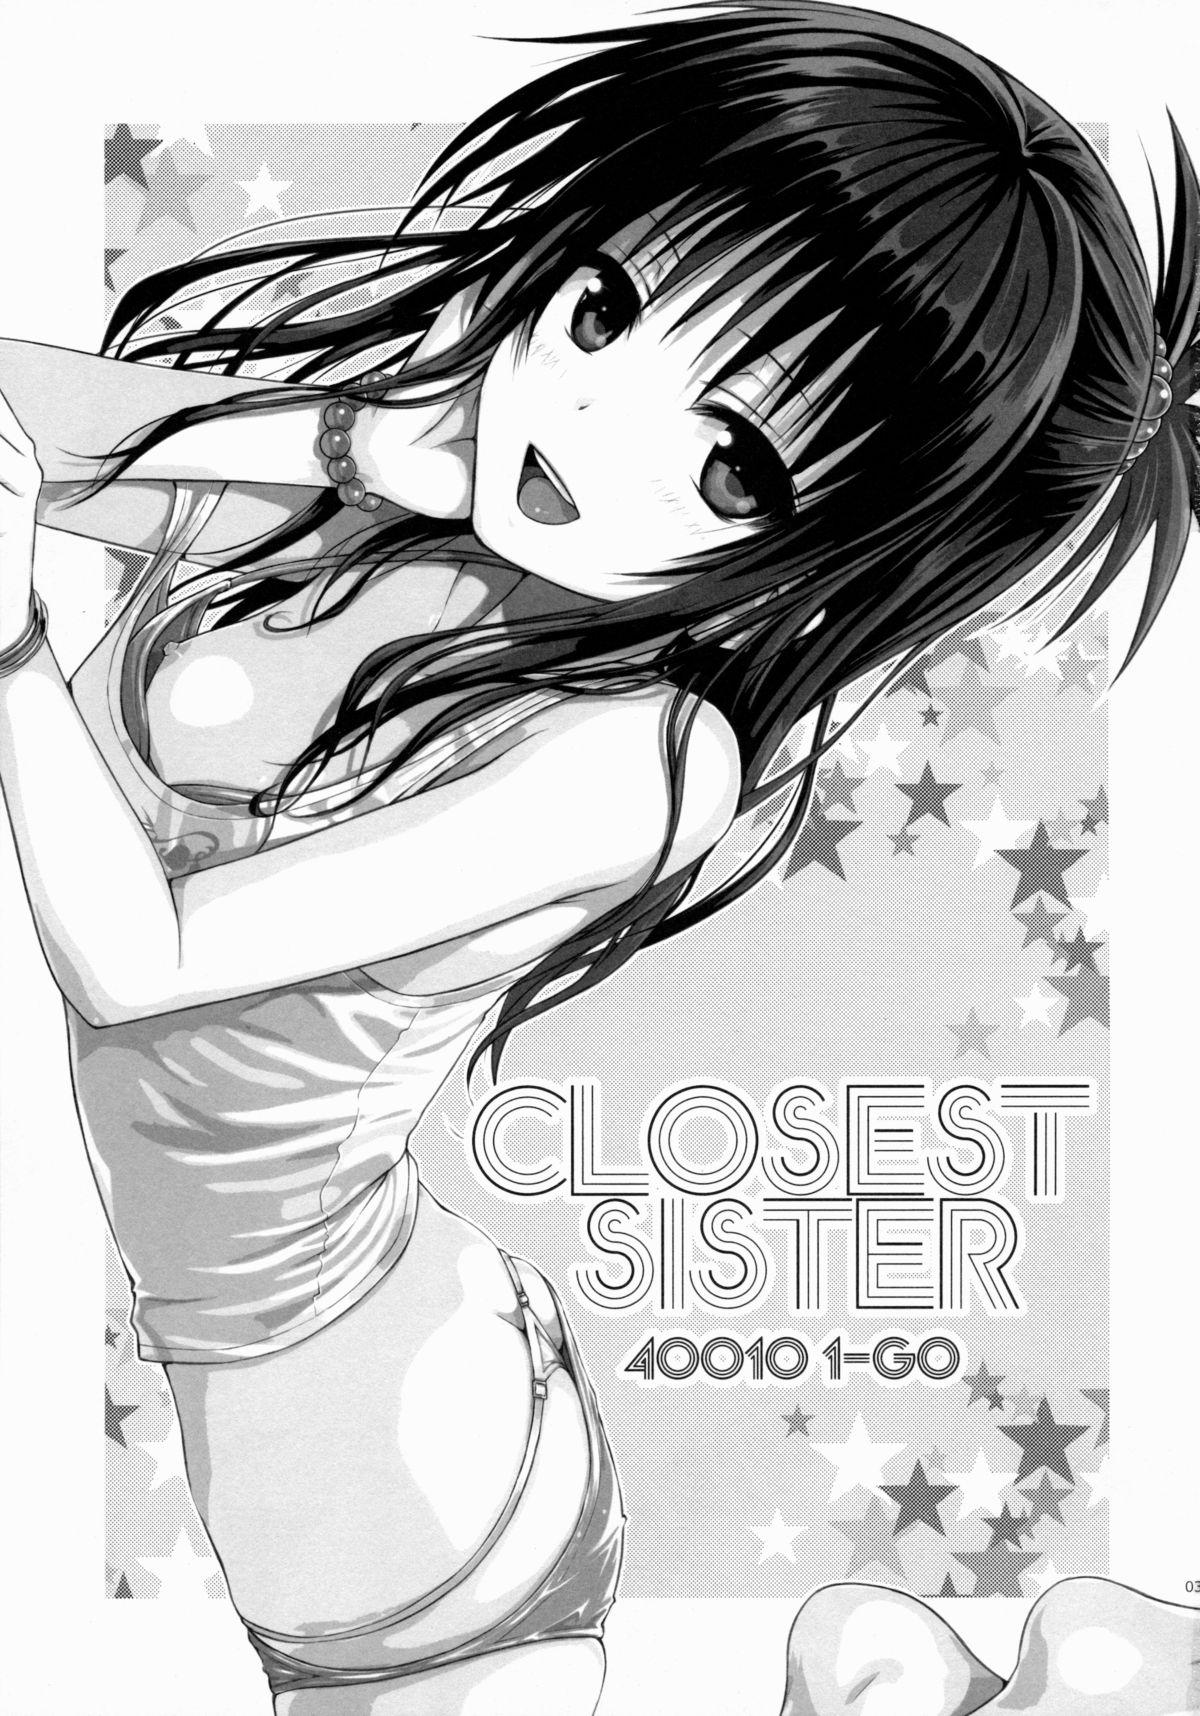 Jerk Closest Sister - To love-ru Ametur Porn - Page 3